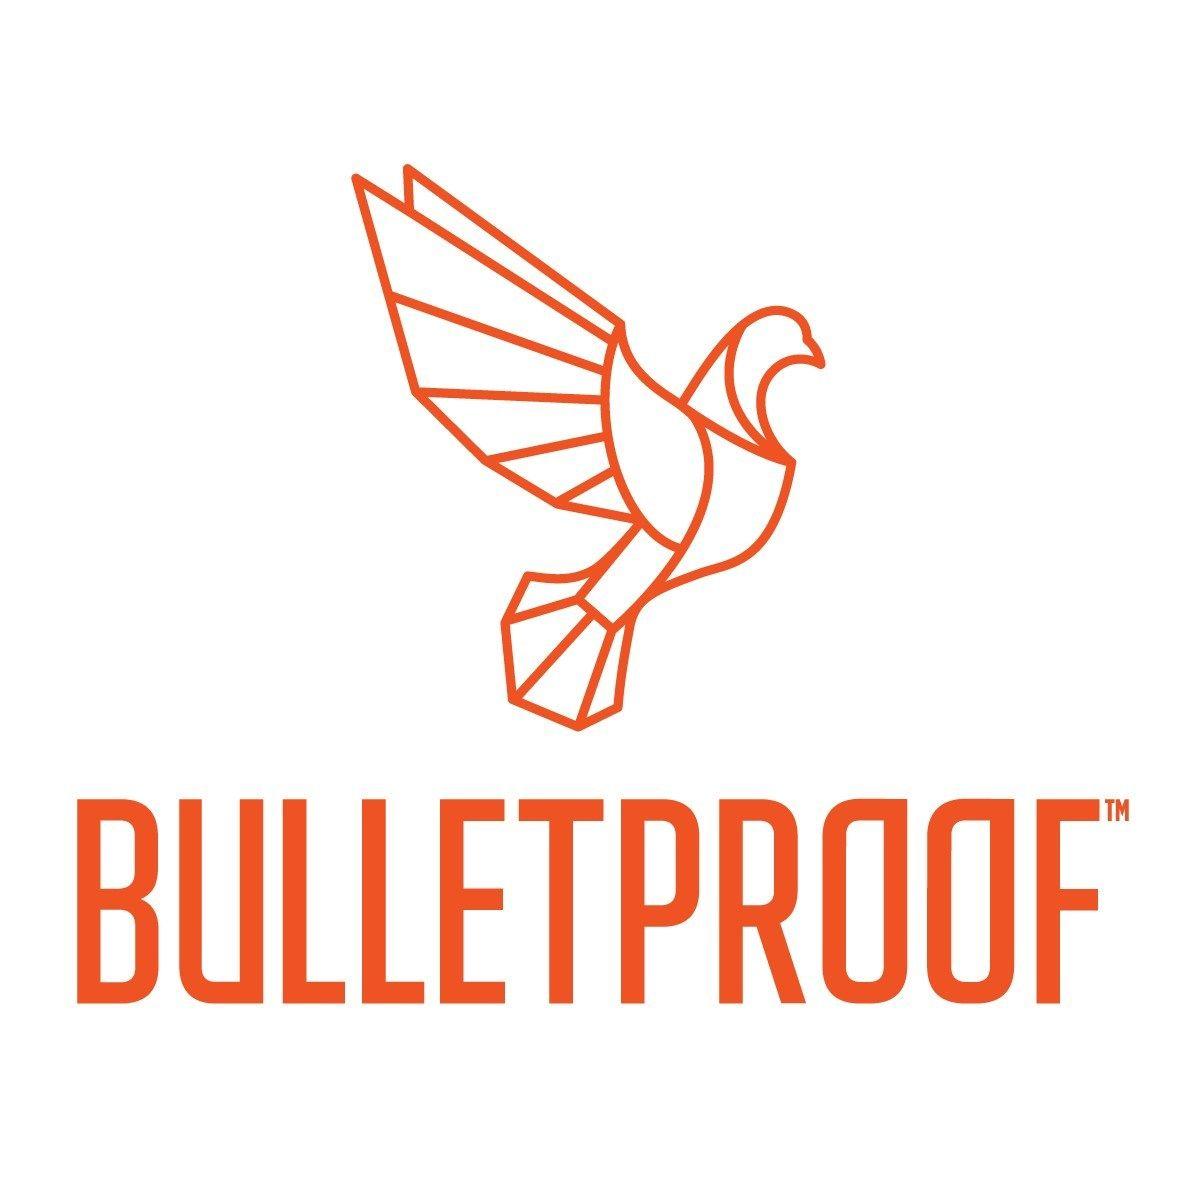 Bulletproof Logo - Bulletproof Appoints New Chief Financial Officer & Vice President of ...